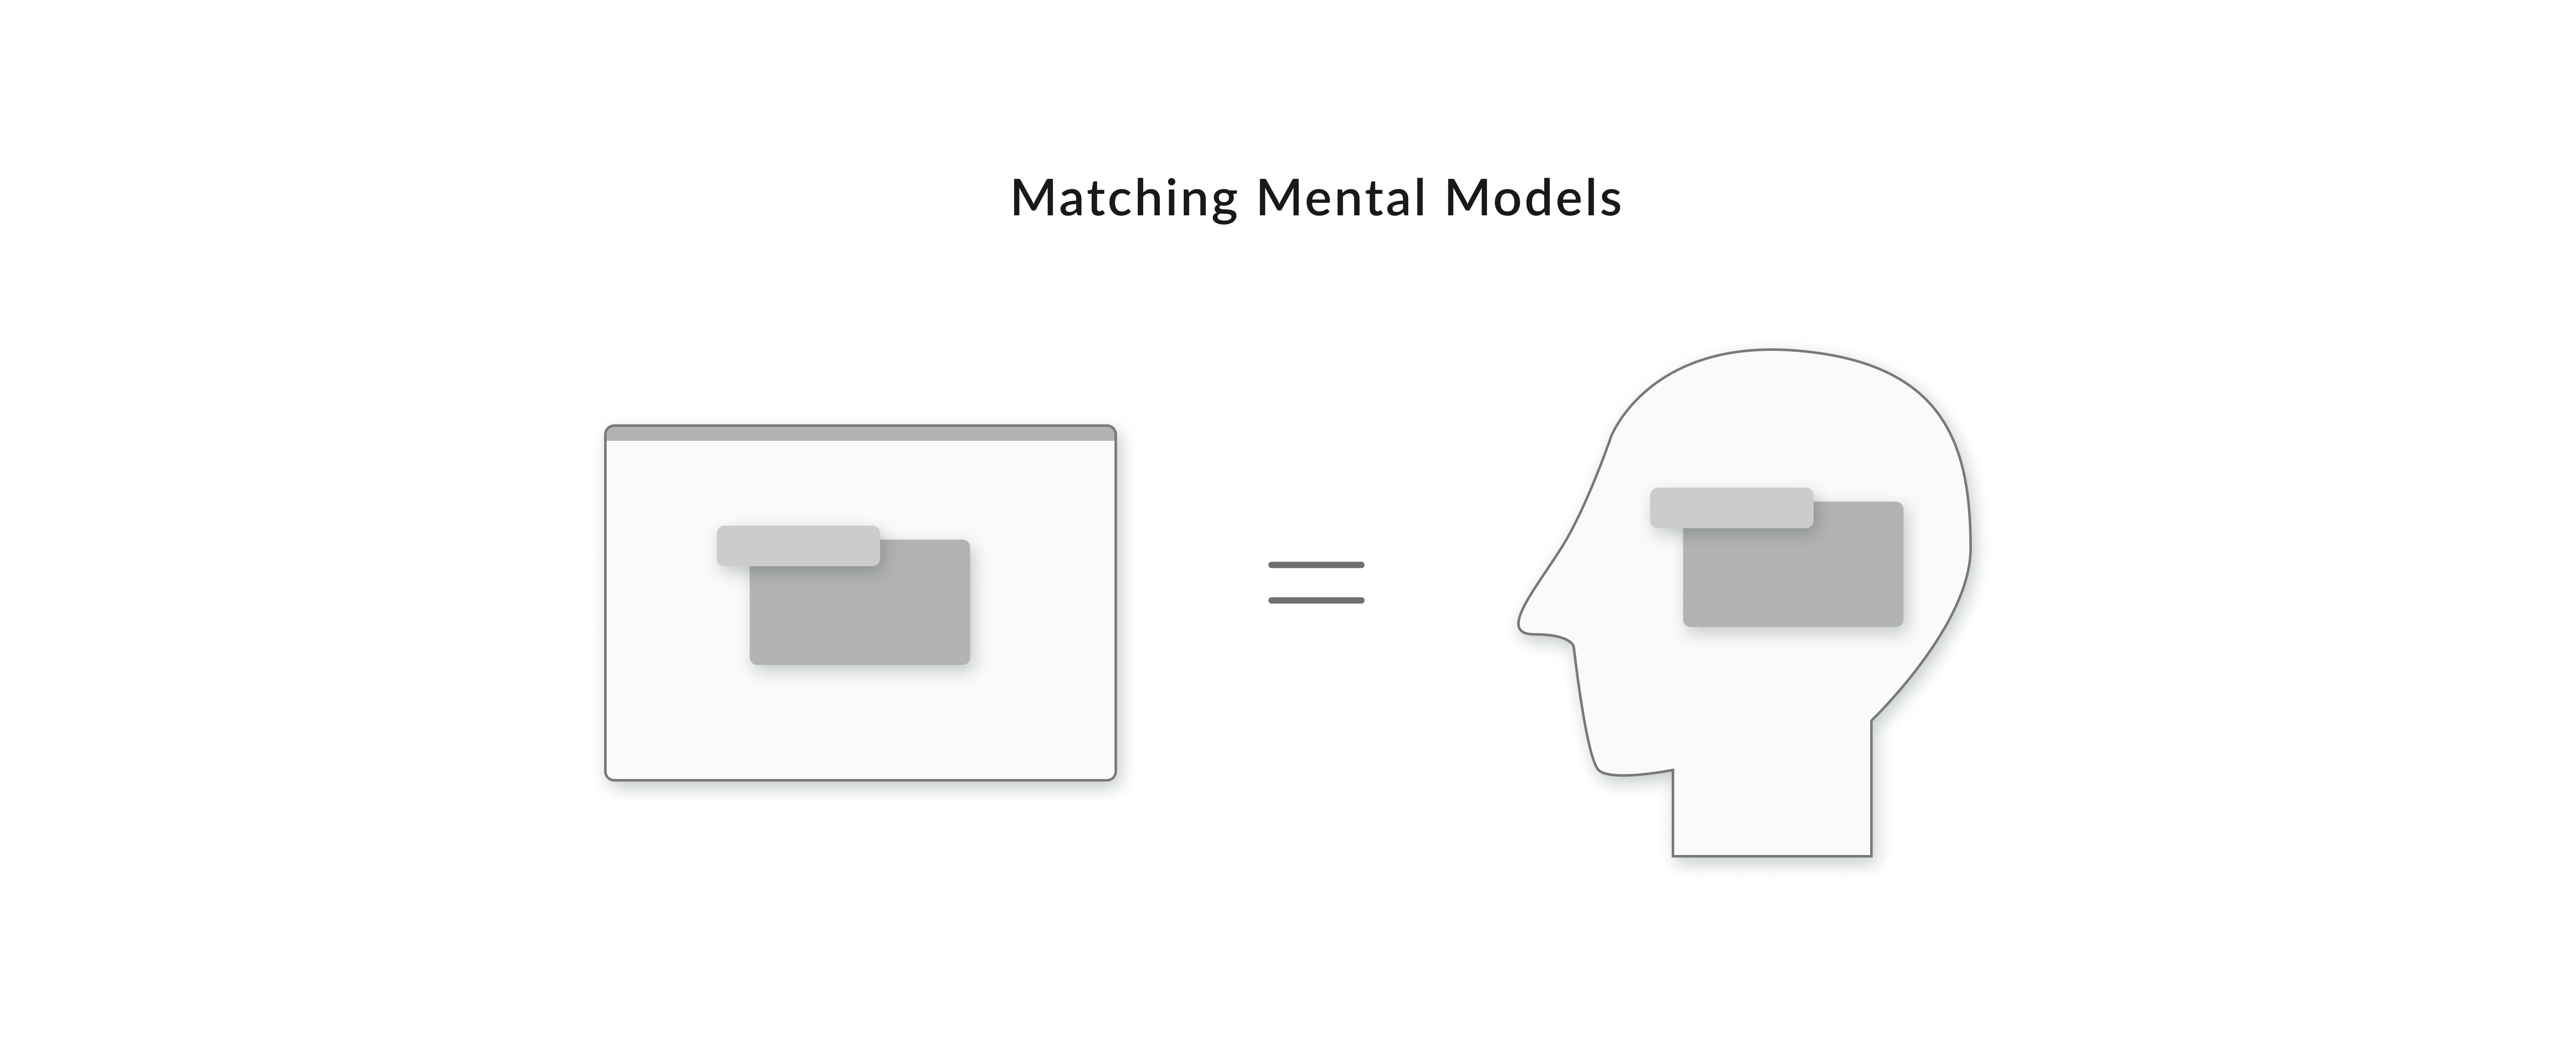 An illustration of matching mental models between the user and the system